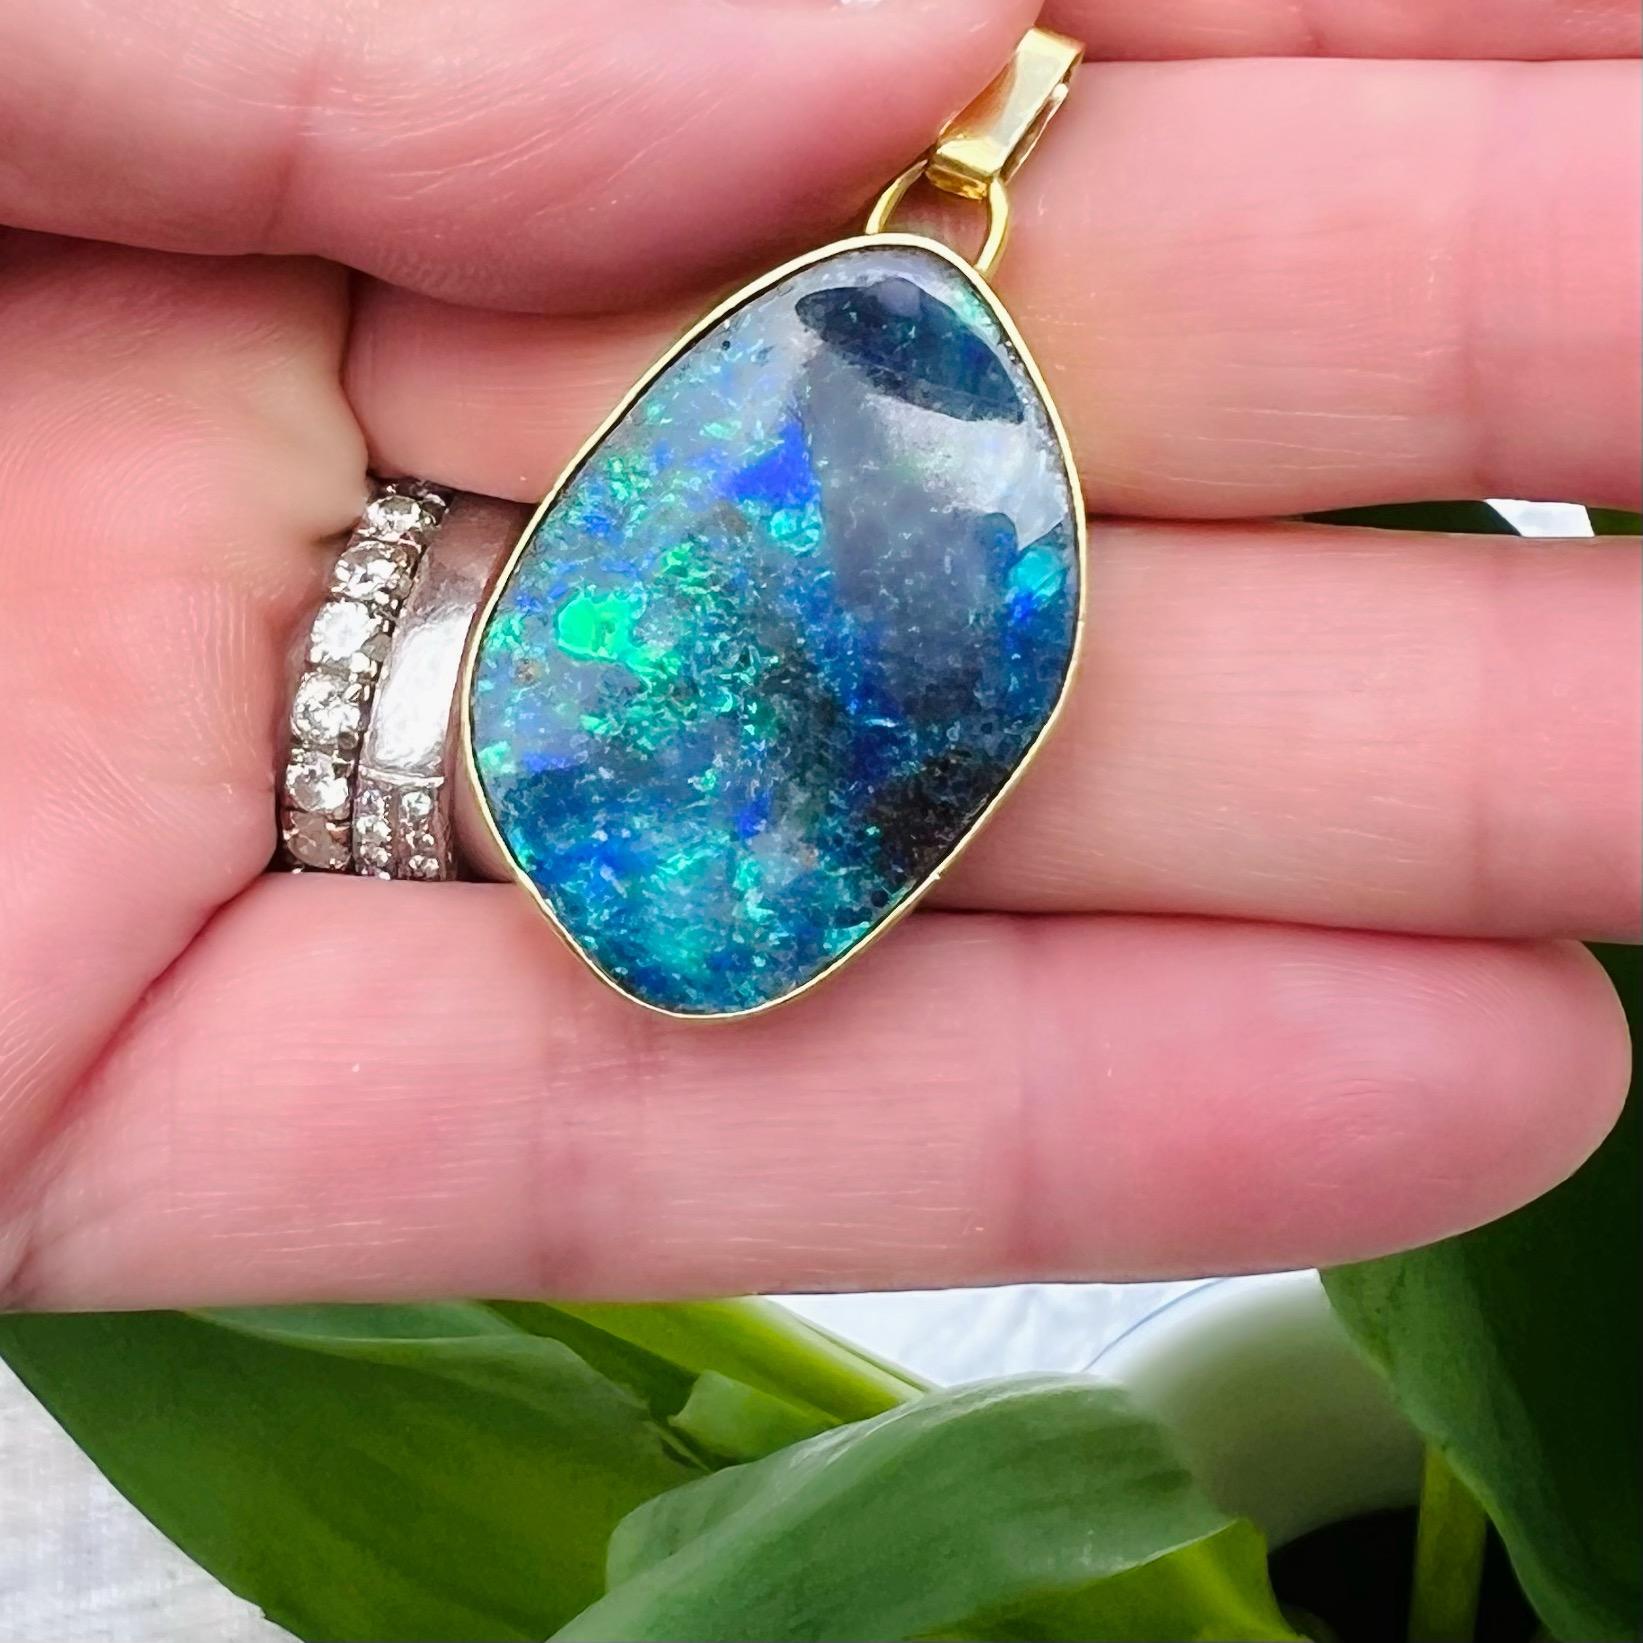 It's hard to imagine that such natural beauty comes from our earth. This 18 karat yellow gold pendant features an organic wavy Australian boulder opal (weighing approximately 4 carats) set in a design that outlines the natural curved edges of this